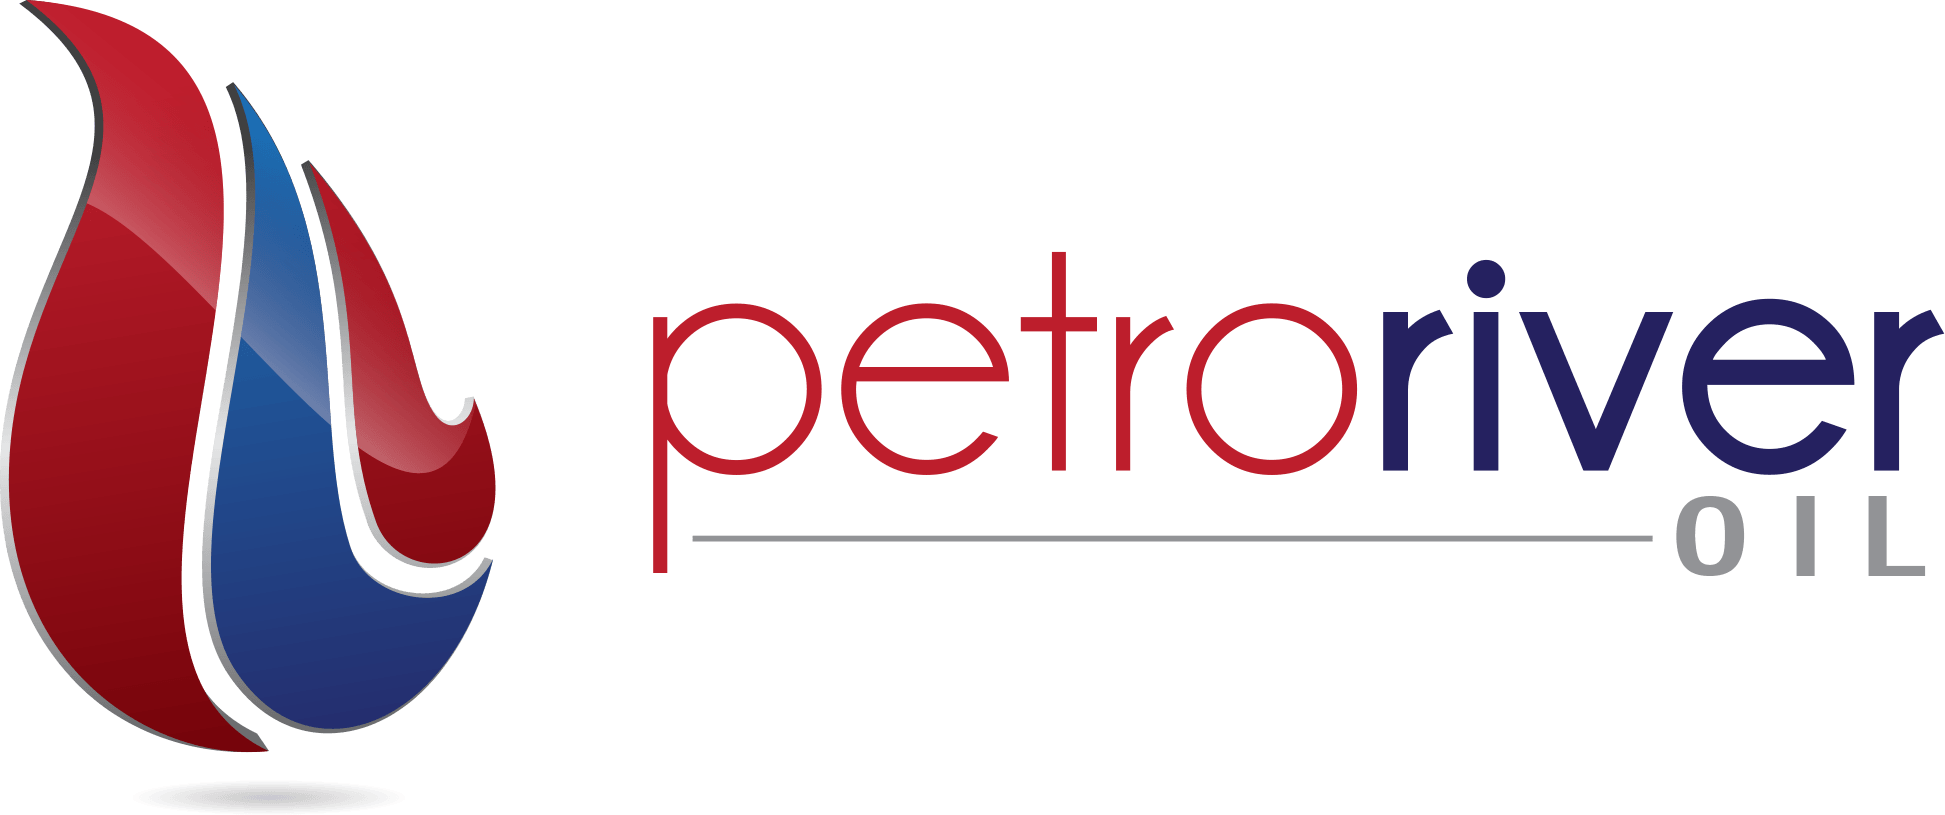 Oil Co Logo - Petro River Oil – Discovering The Undiscovered